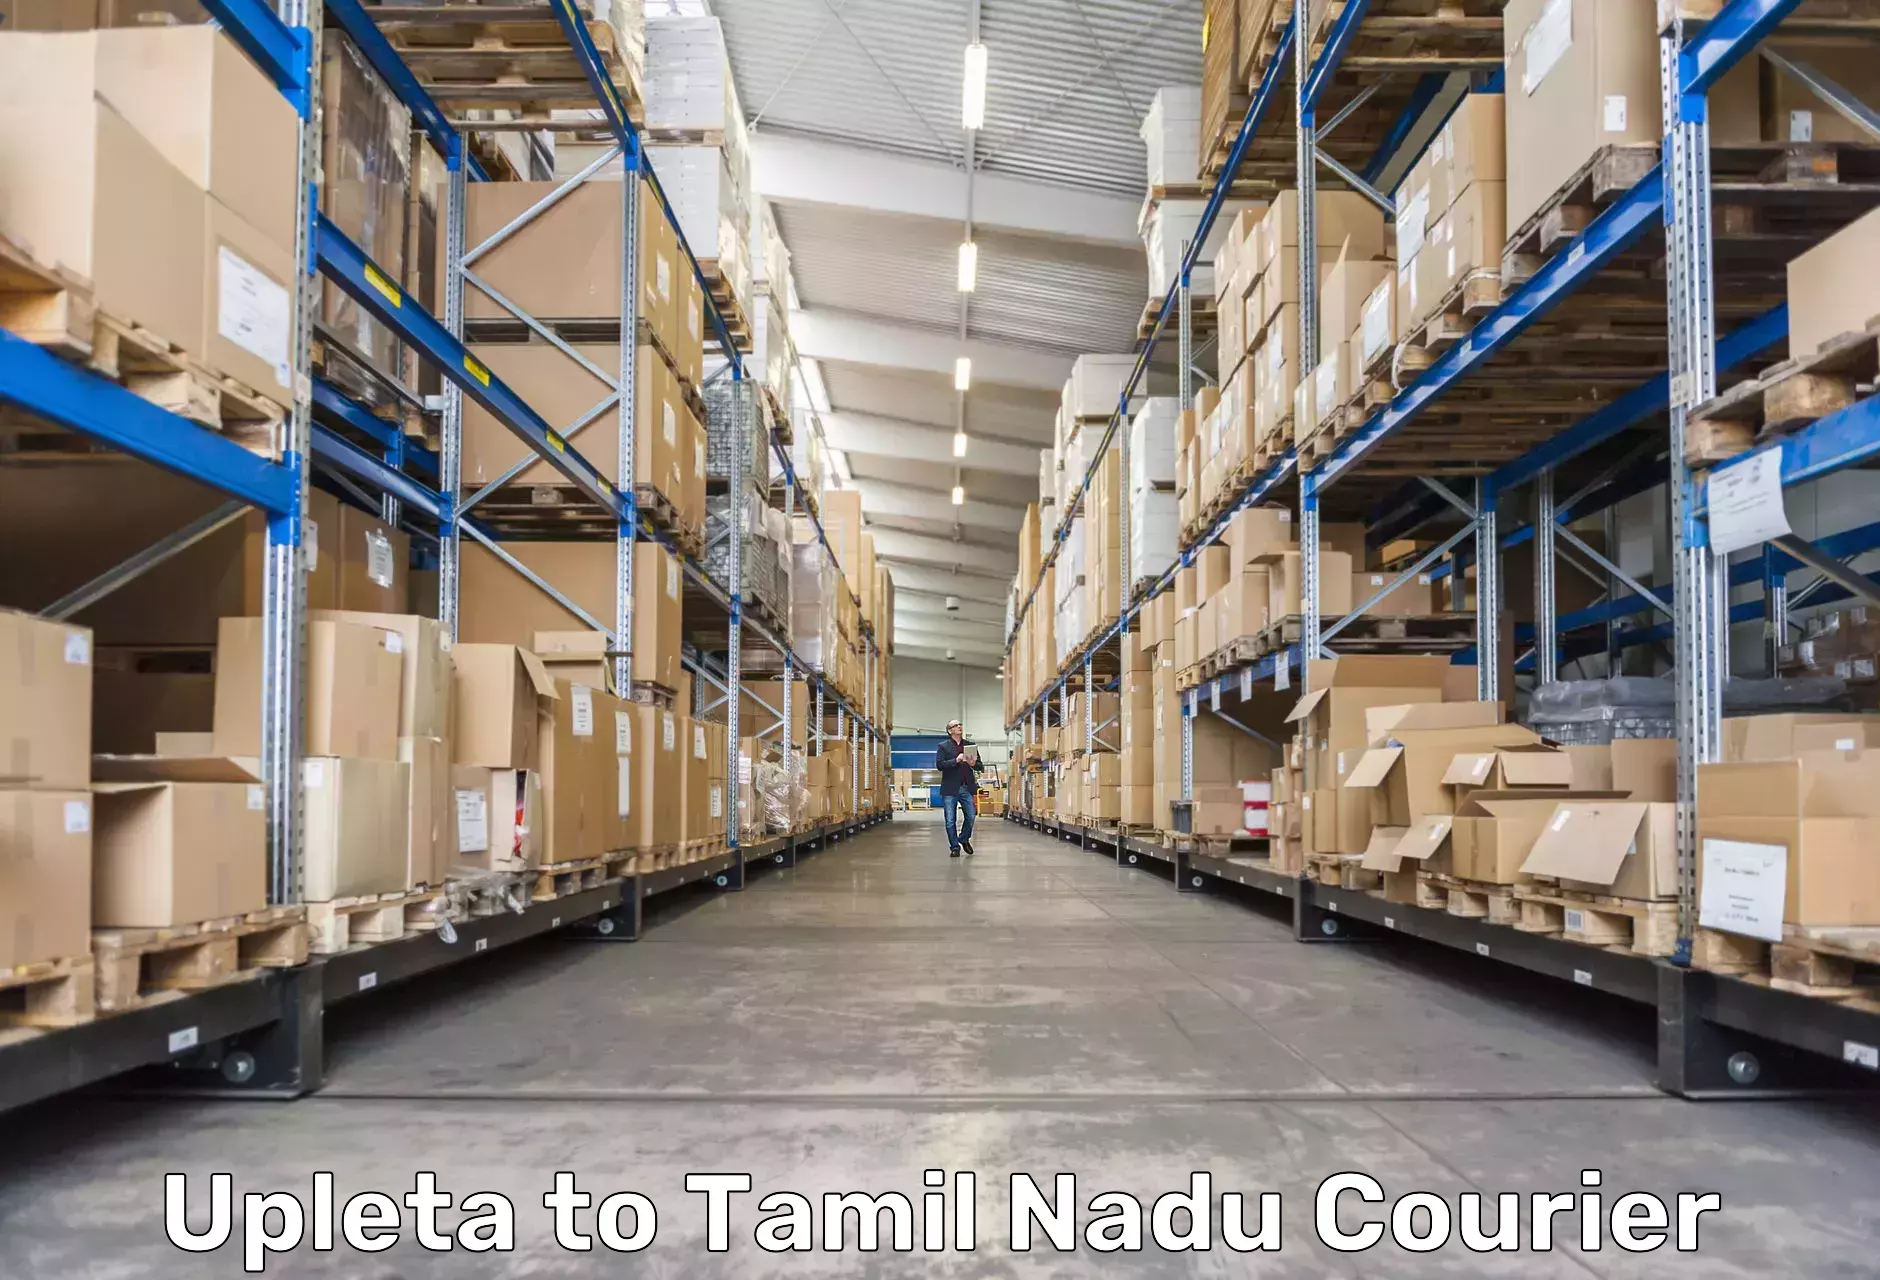 Reliable freight solutions Upleta to Tamil Nadu